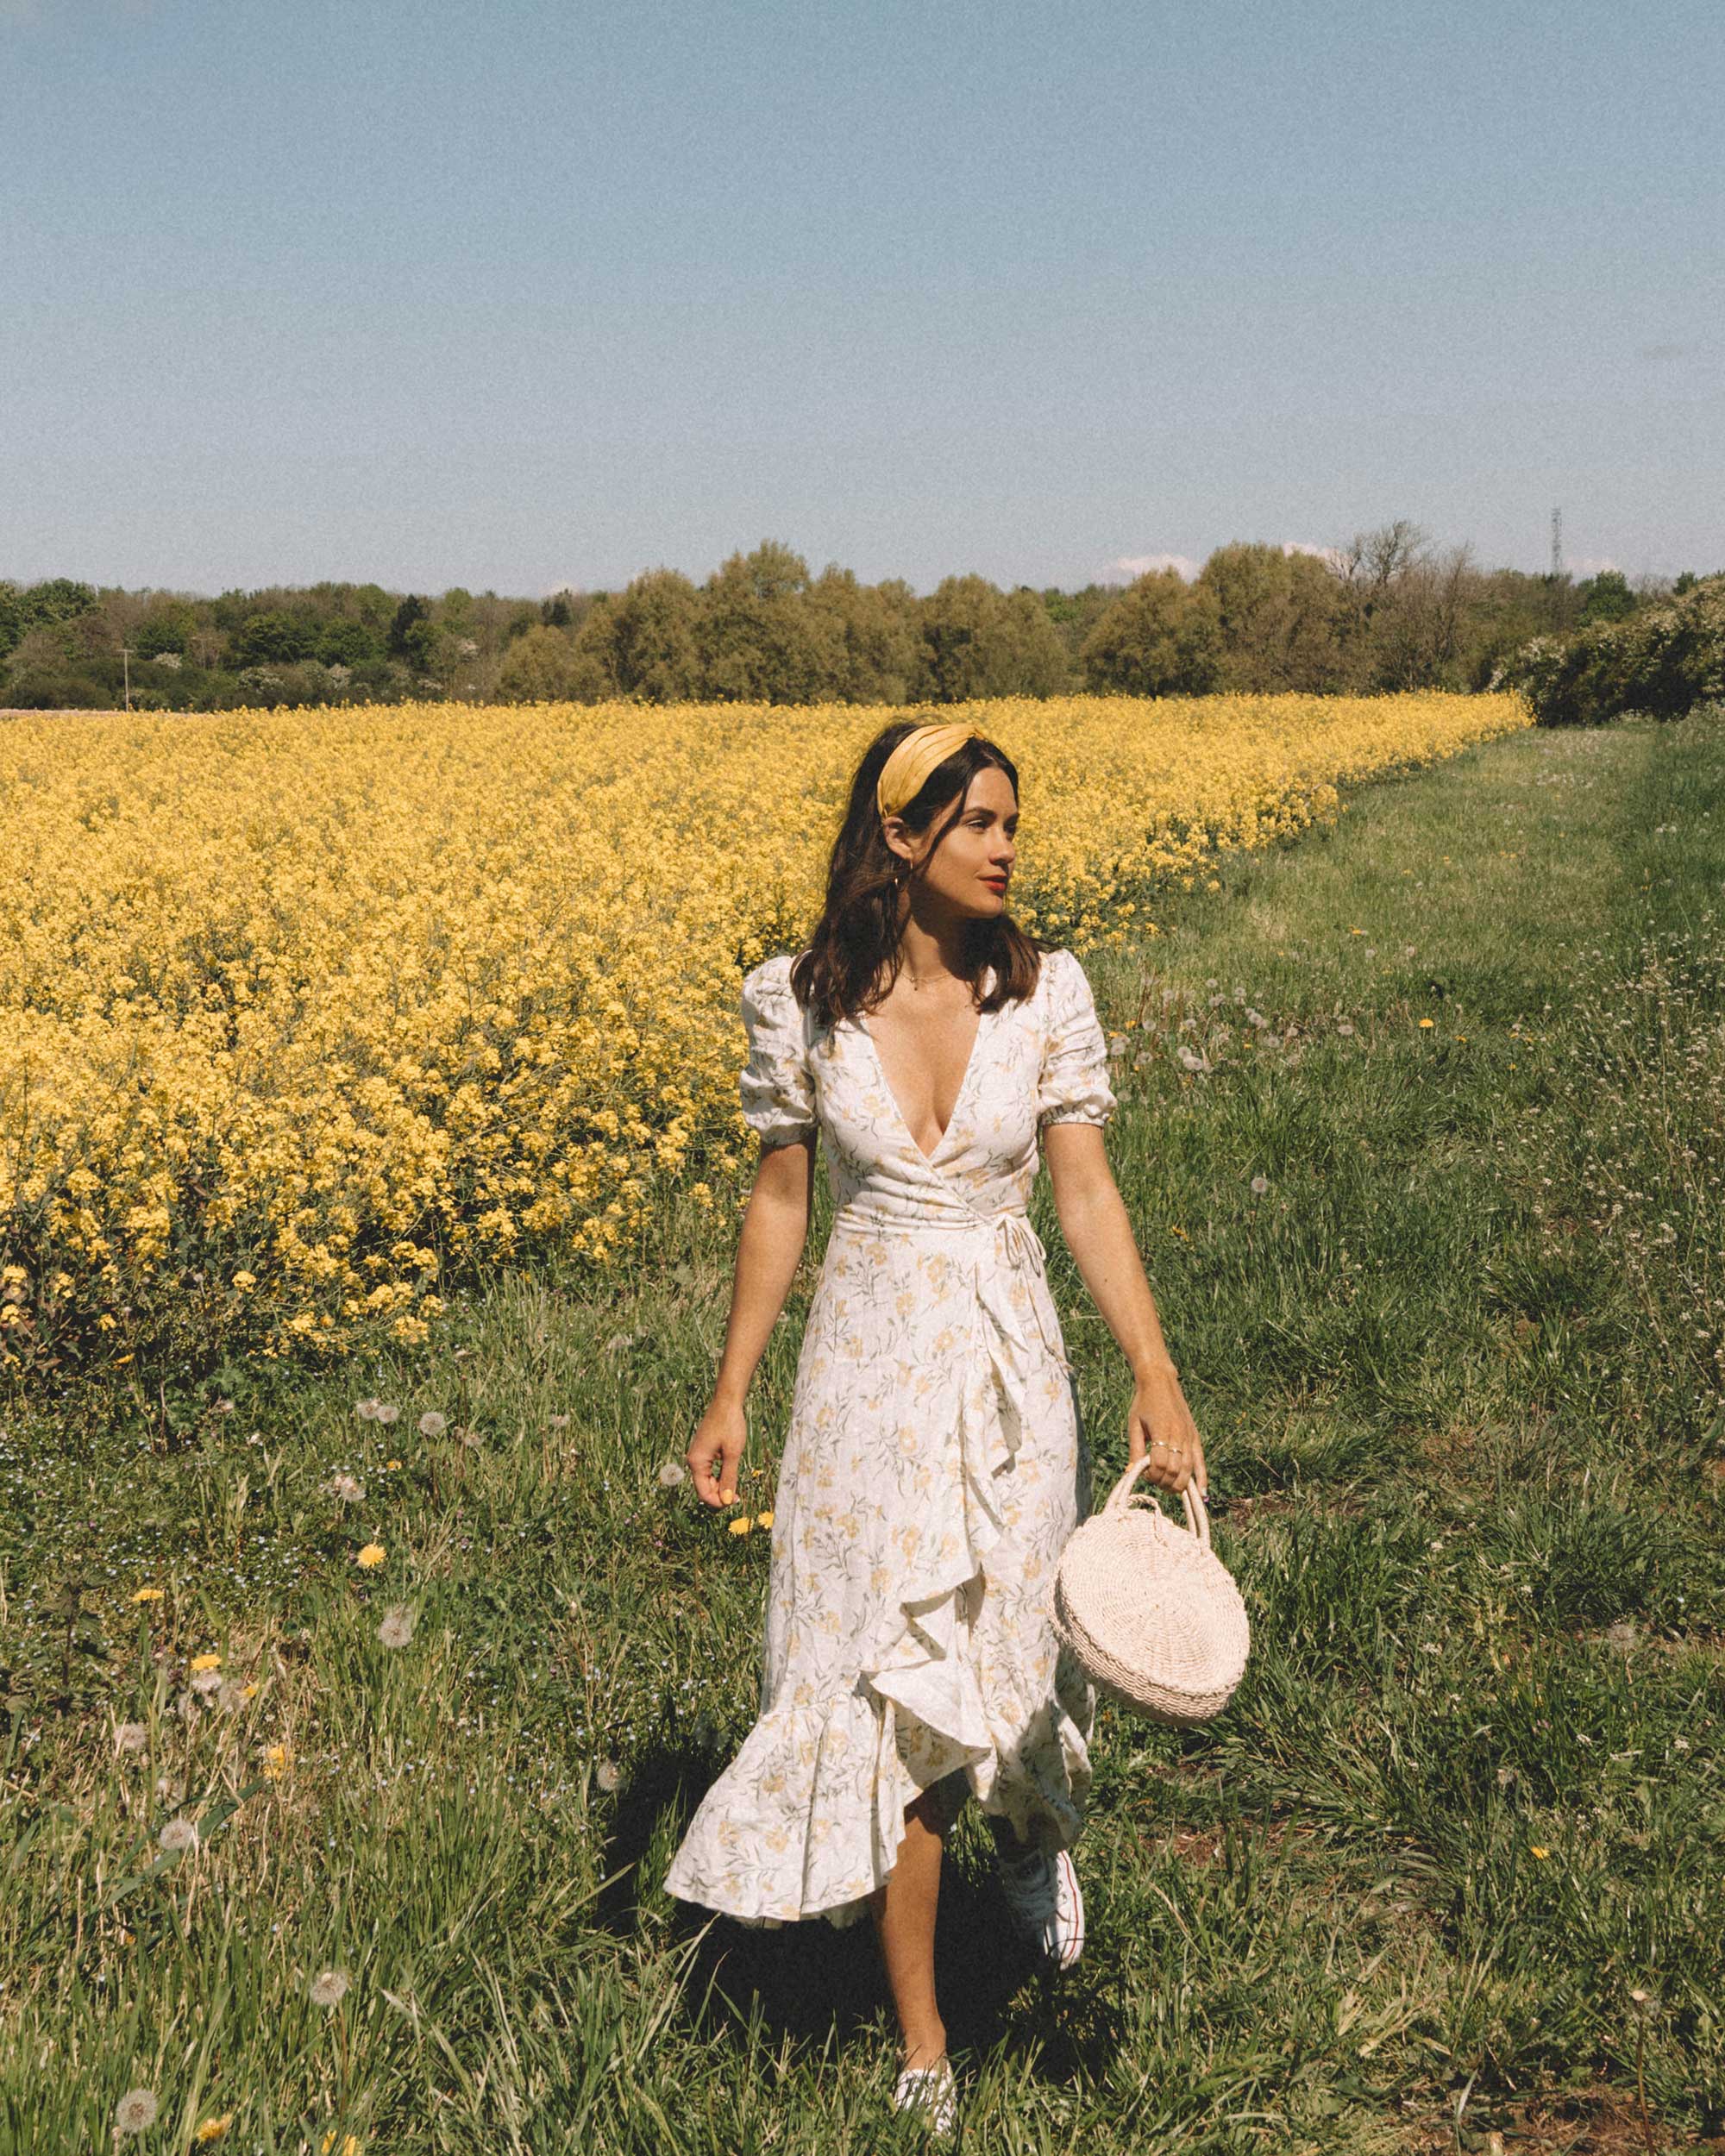 Sarah Butler of Sarah Styles Seattle wears And Other Stories Ruffled Linen Wrap Midi Dress and round woven bag in England Countryside for the perfect floral summer dress | @sarahchristine 18.jpg